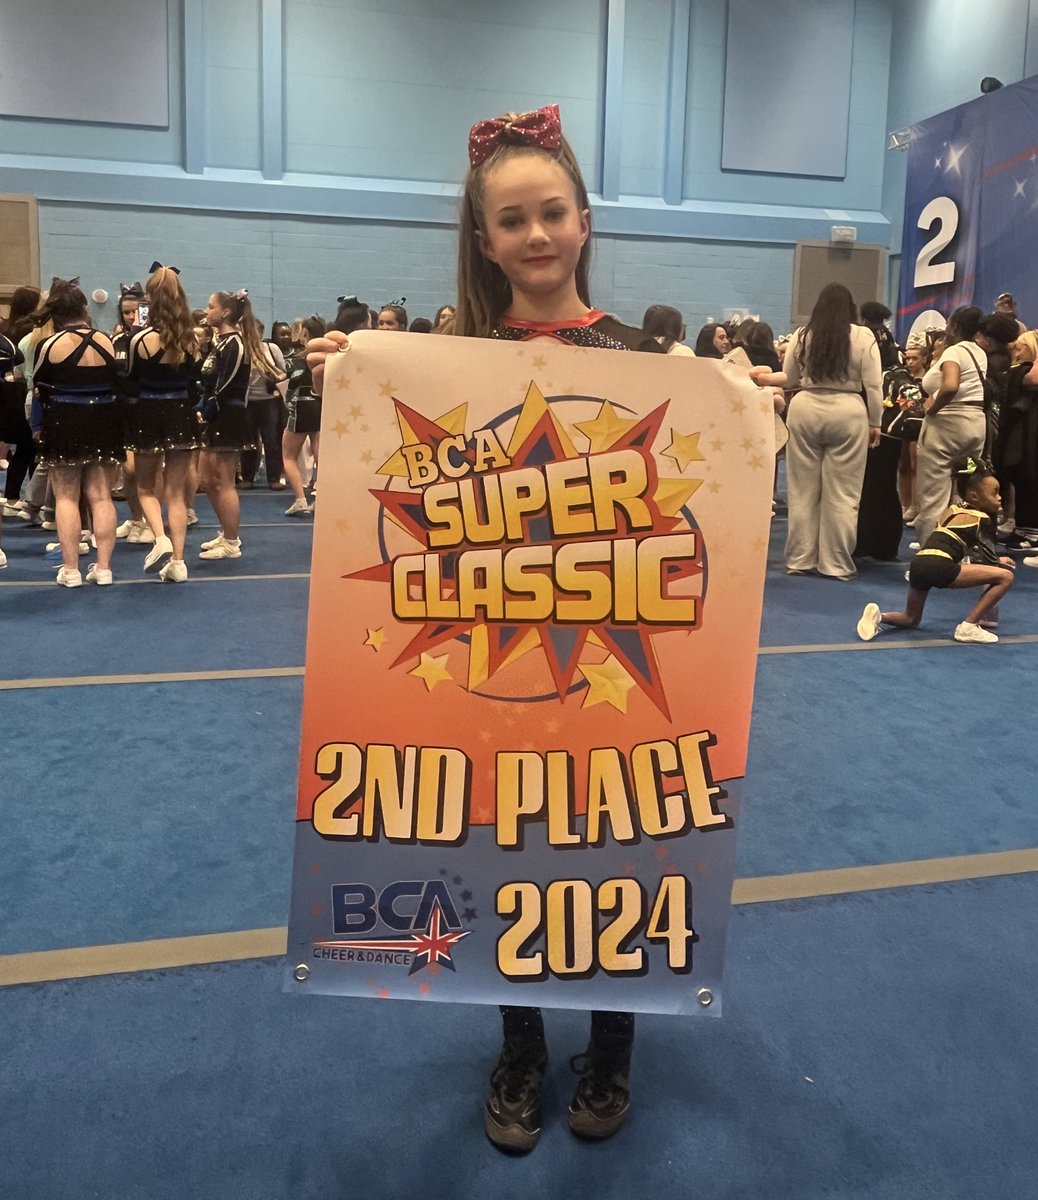 Fabulous time today for Phoebe and her Senior Cheer team Flare Girls at British Cheerleading Association Super Classic Competition 2nd Place and missed out on 1st by 0.78% @stjohnsmiddle @sjmspe